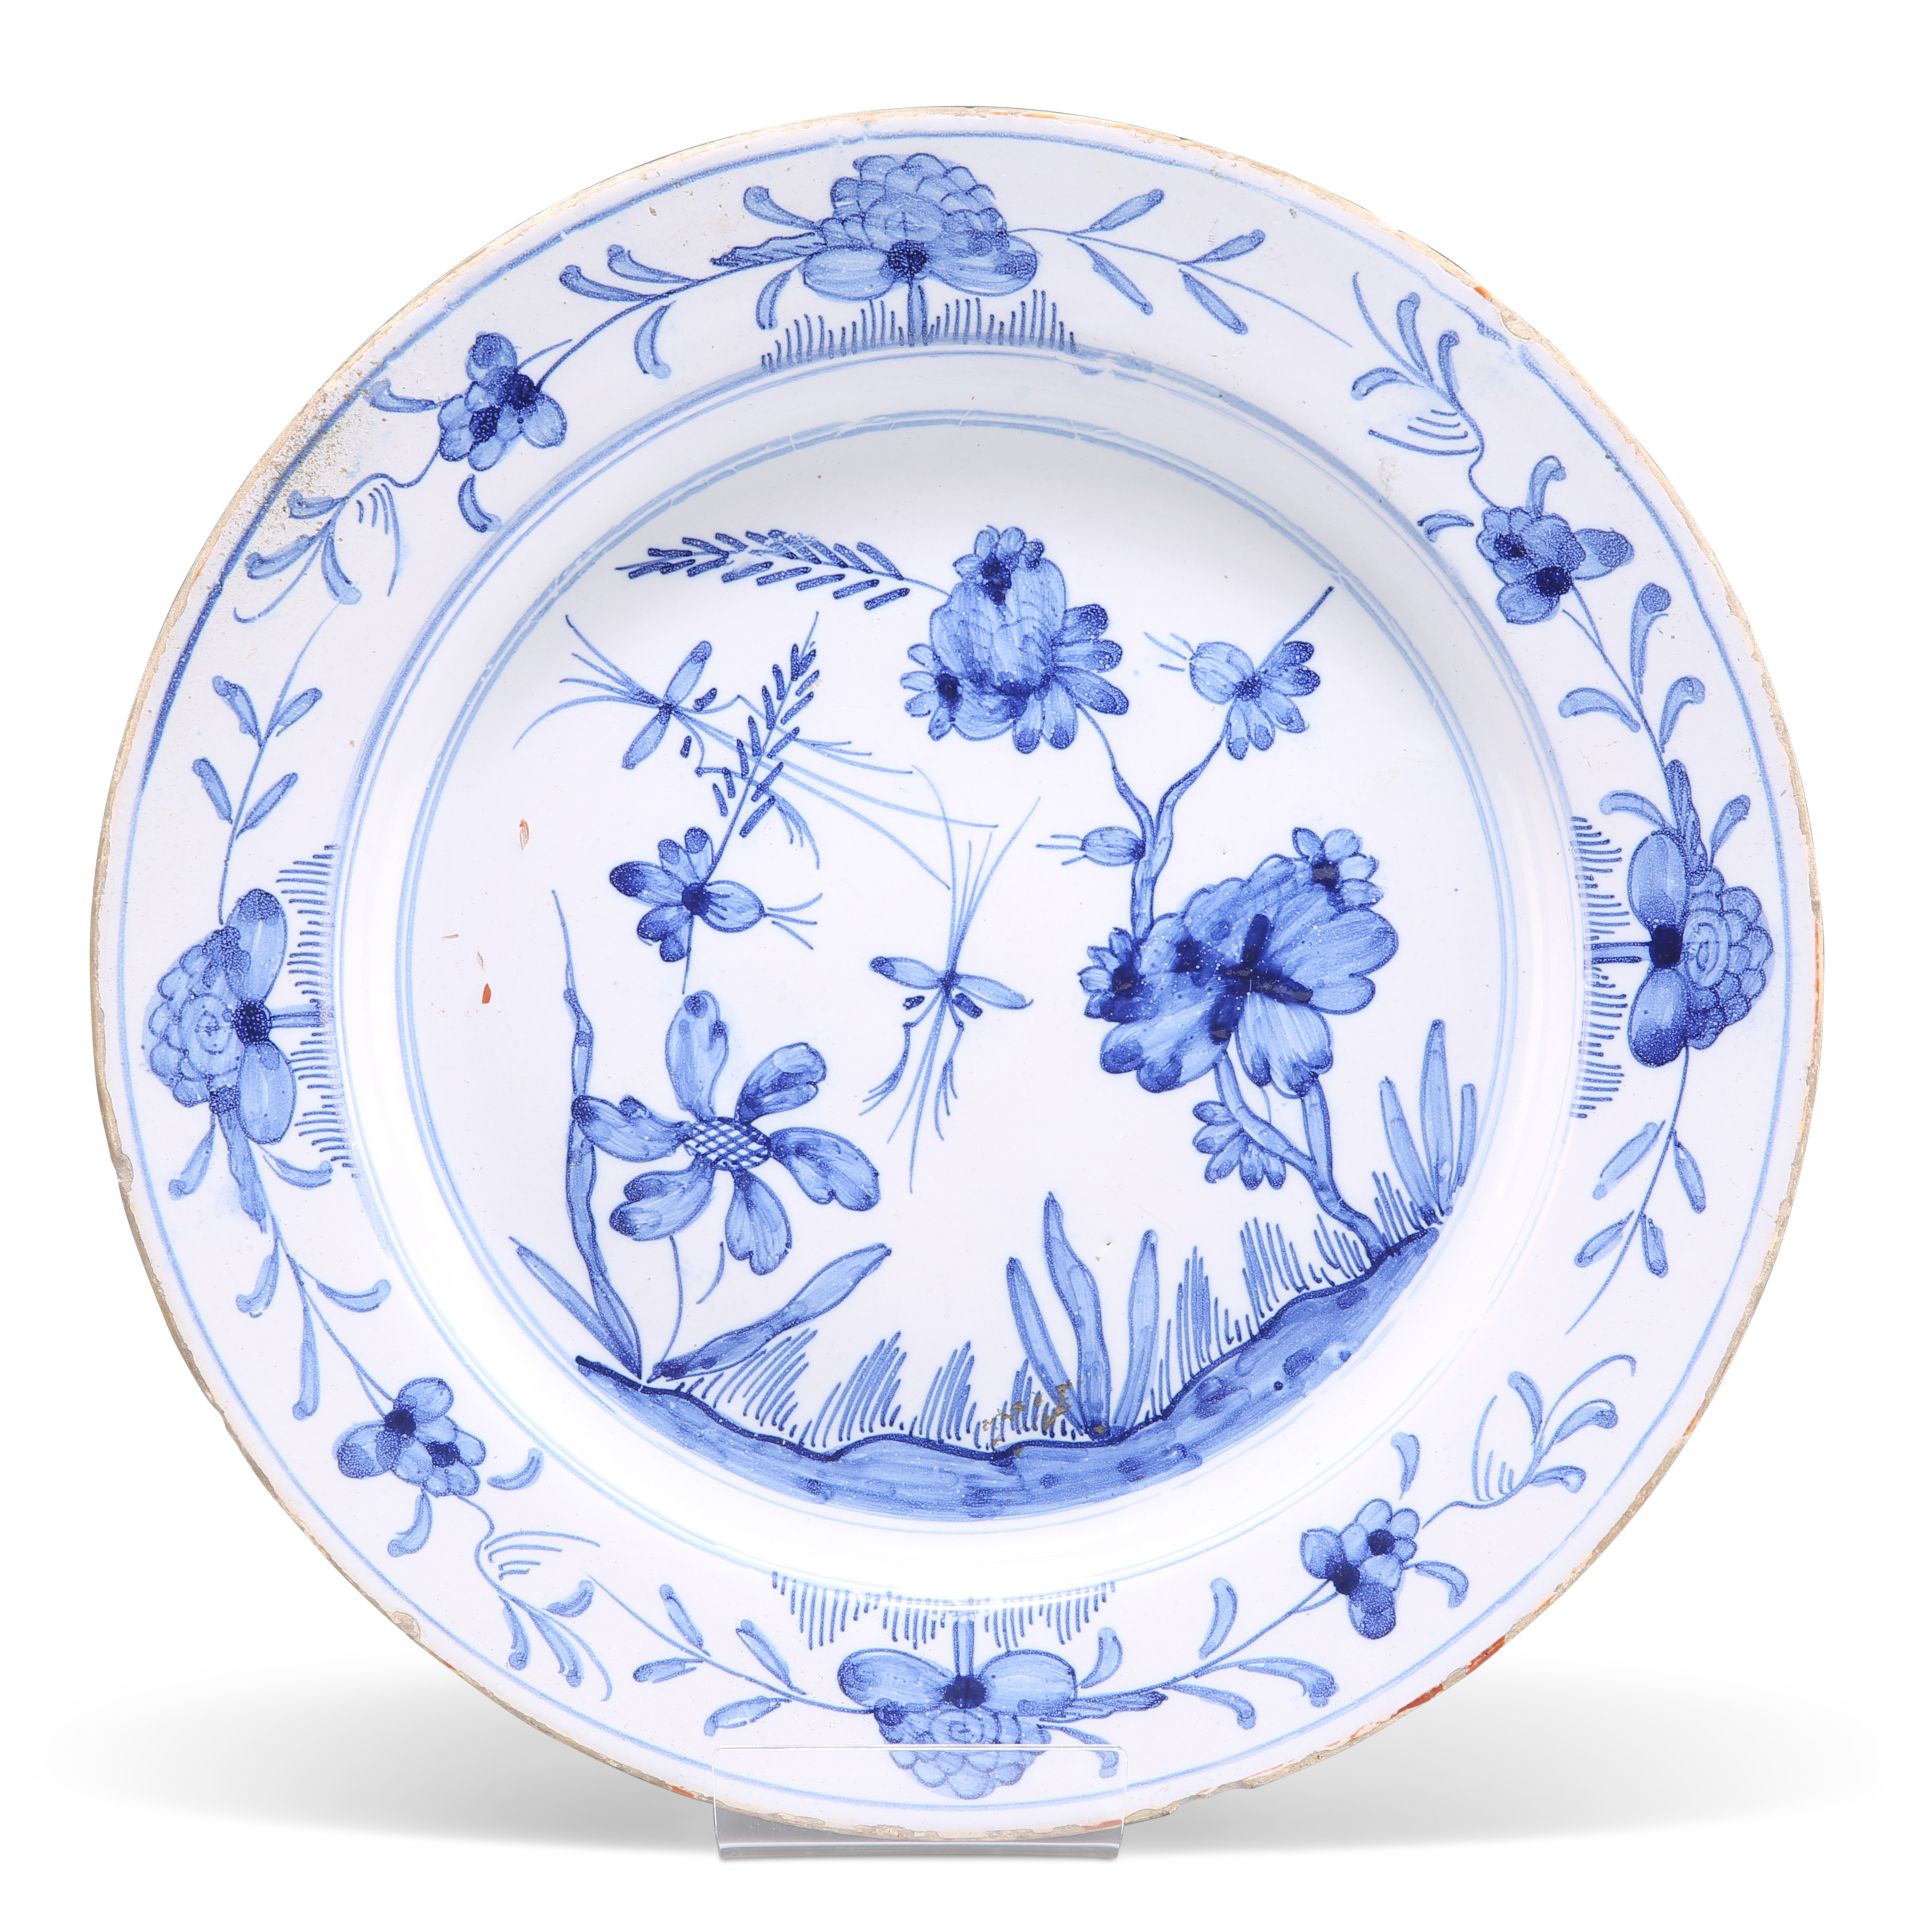 AN ENGLISH DELFT BLUE AND WHITE PLATE, PROBABLY LIVERPOOL